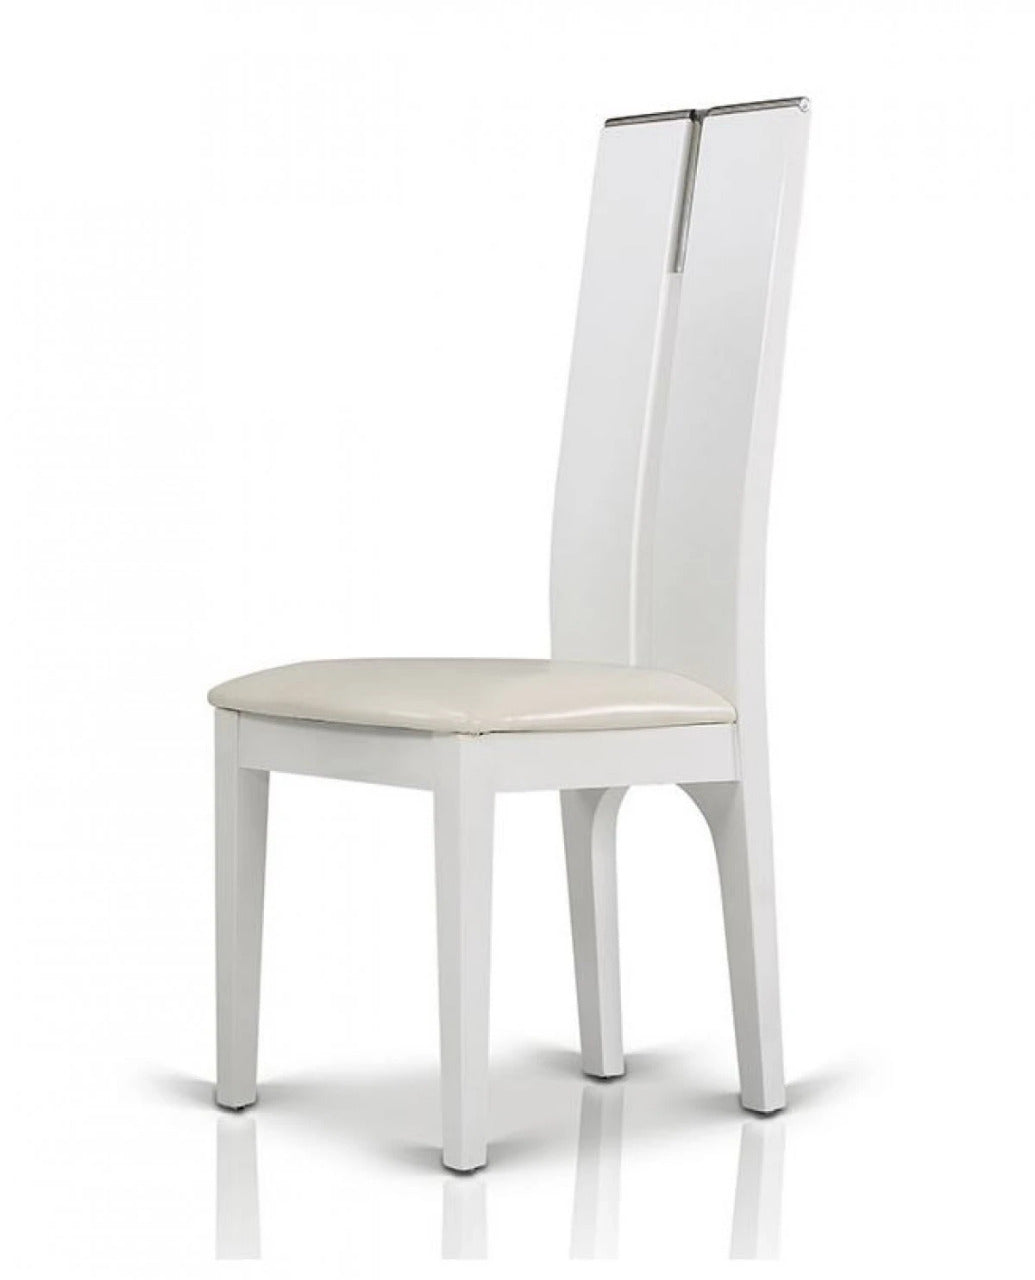 DINING CHAIR MUCHA White Gloss Chair (Set of 2)-1